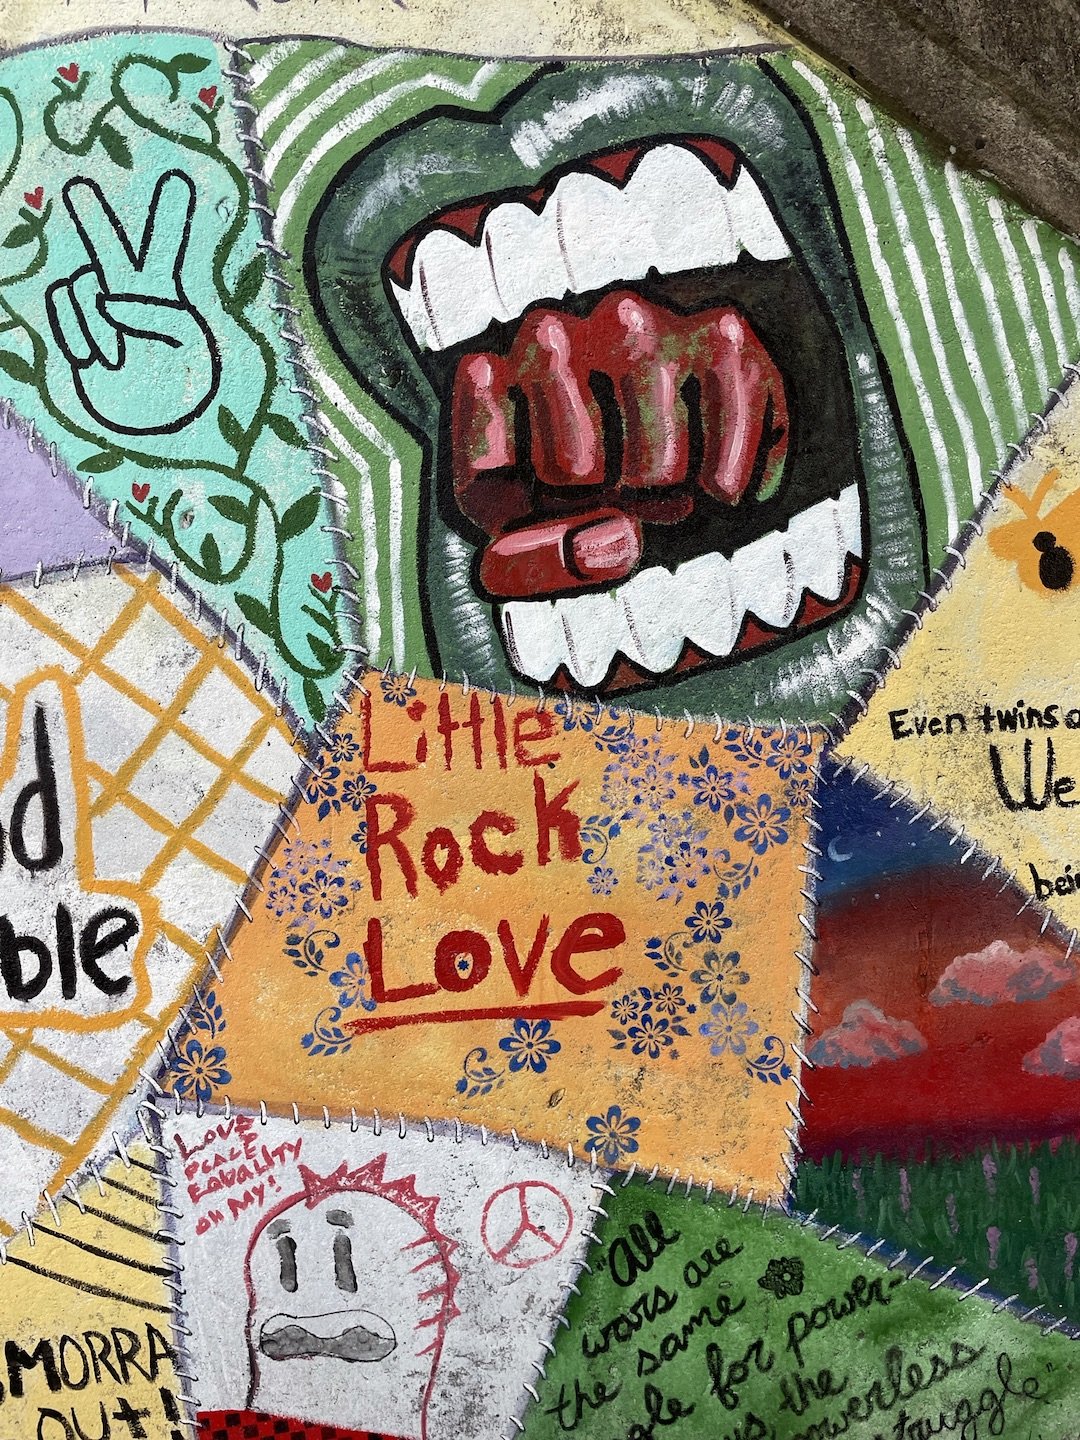    Patchwork Peach and Protest   mural (detail) 